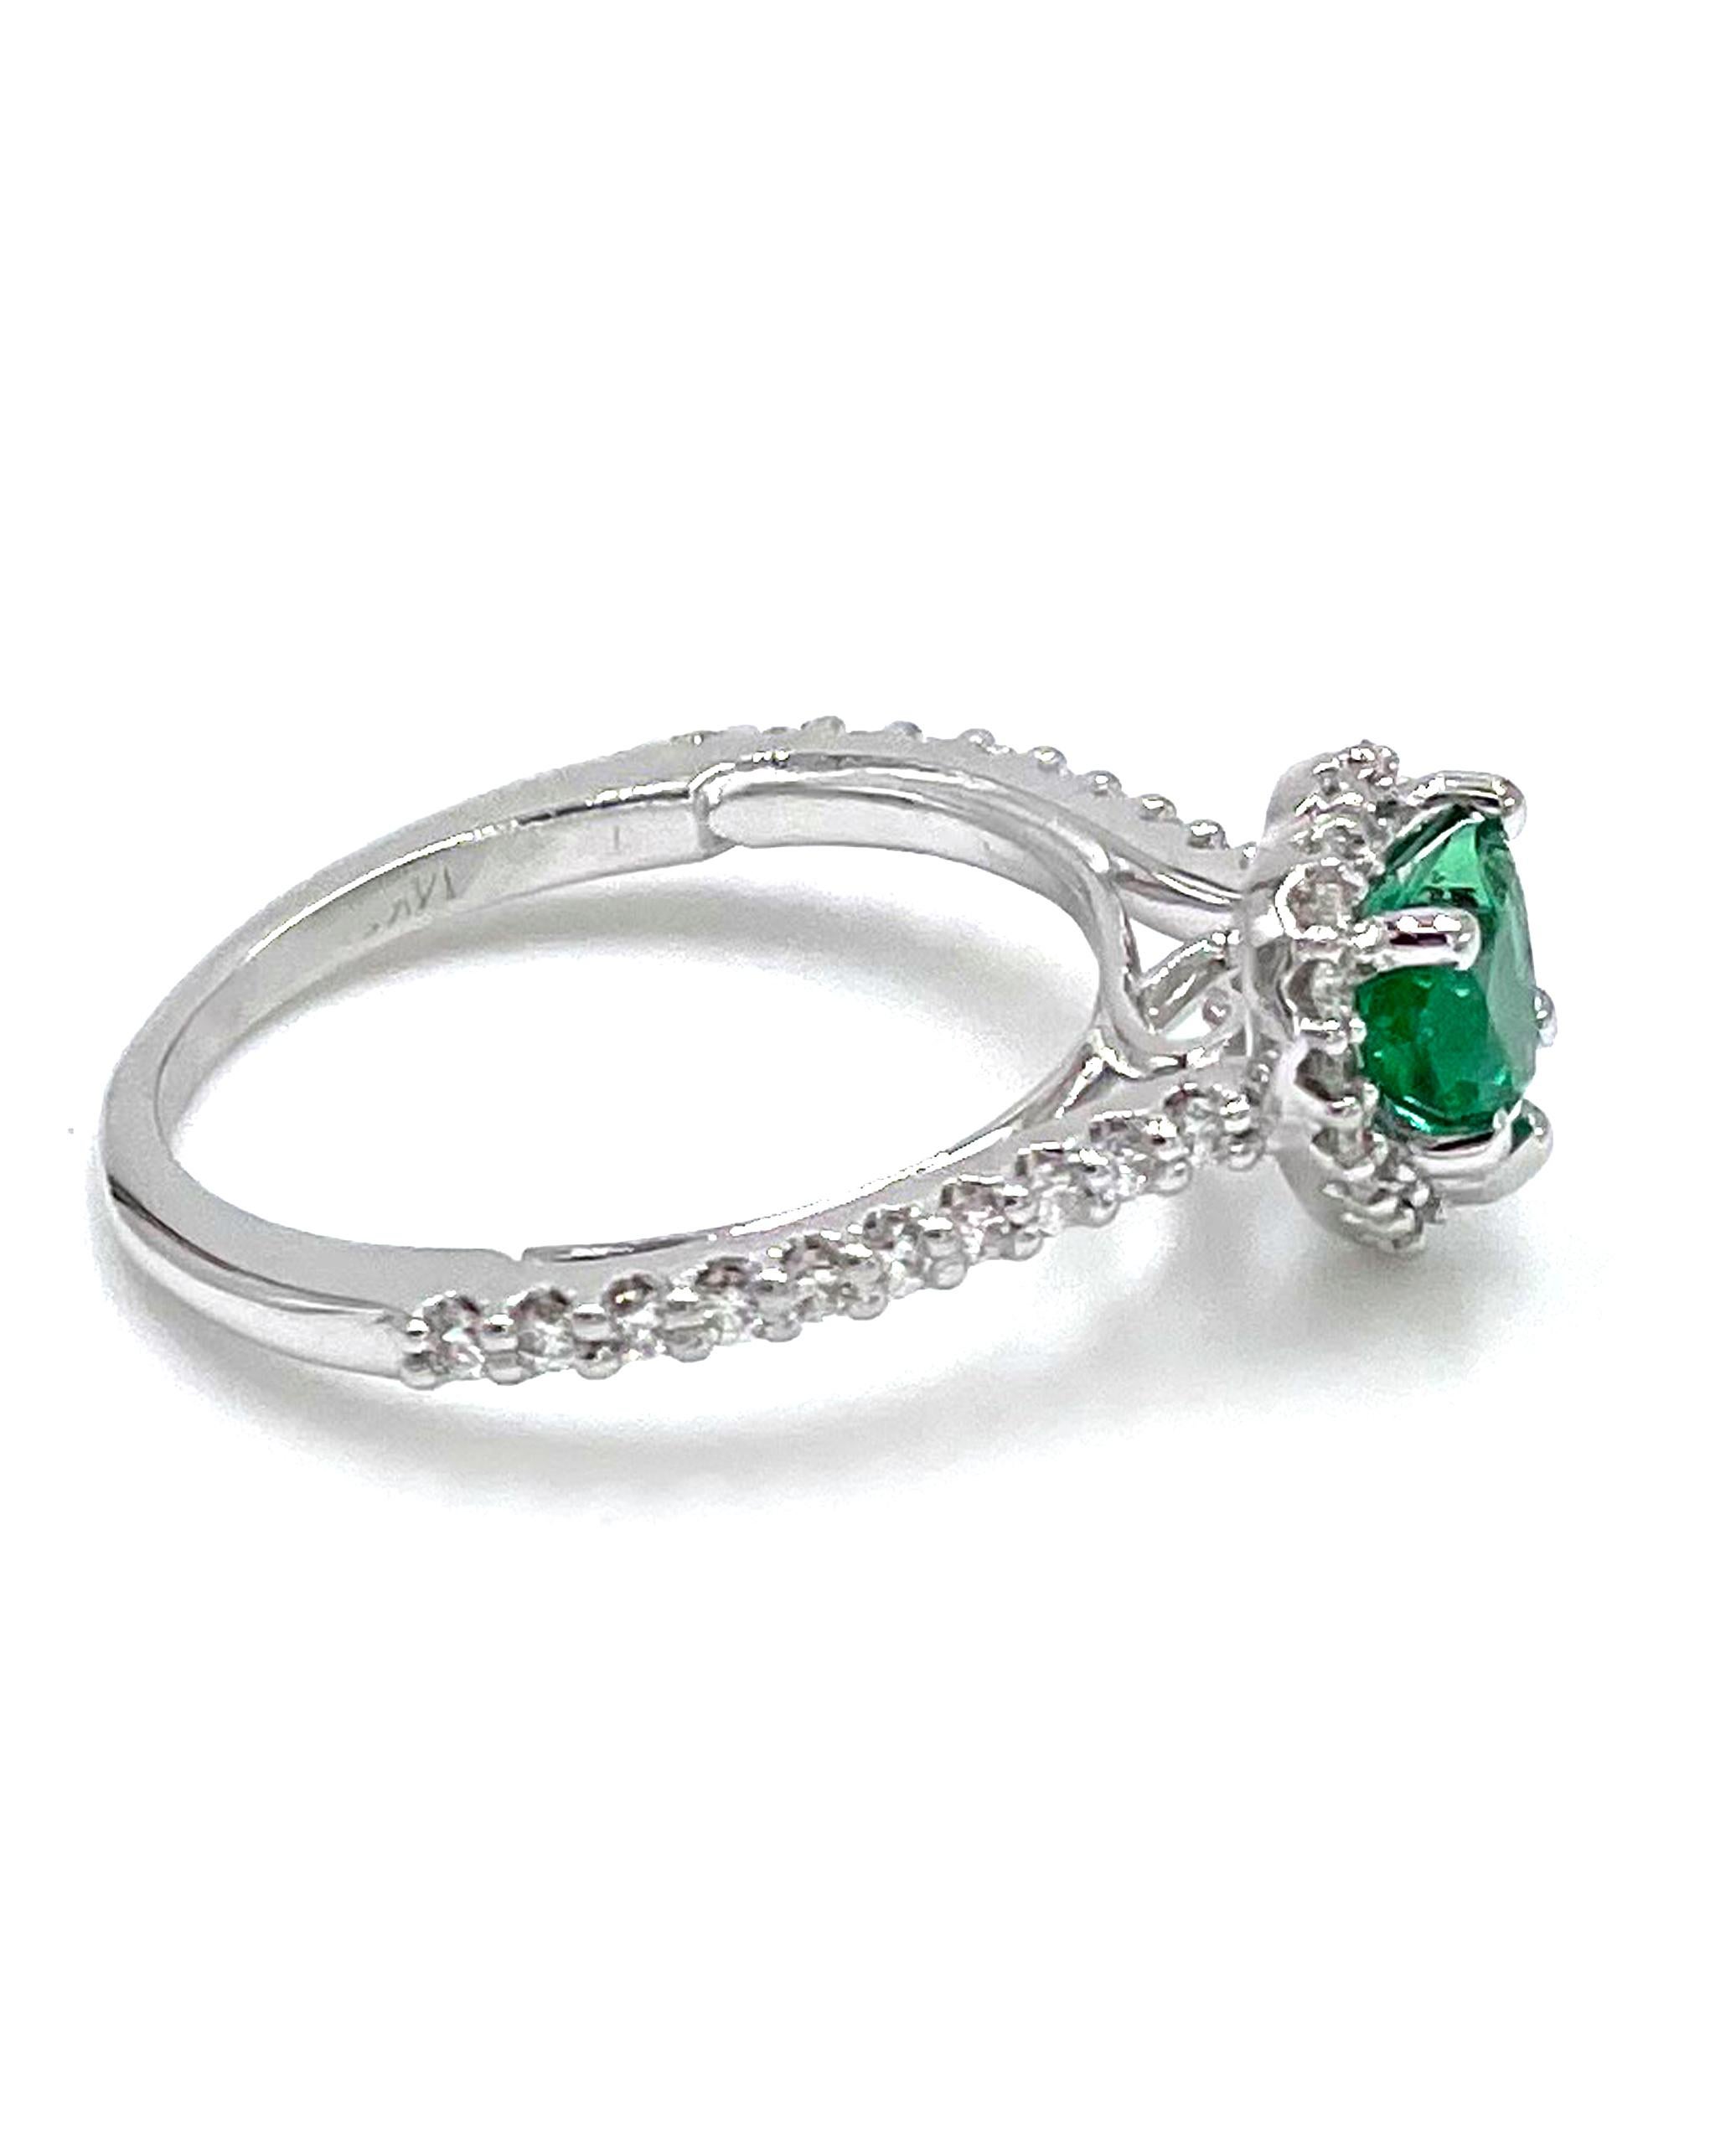 14K white gold heart shaped halo ring with 38 round, brilliant-cut diamonds 0.28 carat.  The center features one heart shape emerald weighing 0.52 carats.

* Diamonds are G/H color, SI1 clarity
* Finger size 5
* Top dimension: 8.40mm
* Band width: